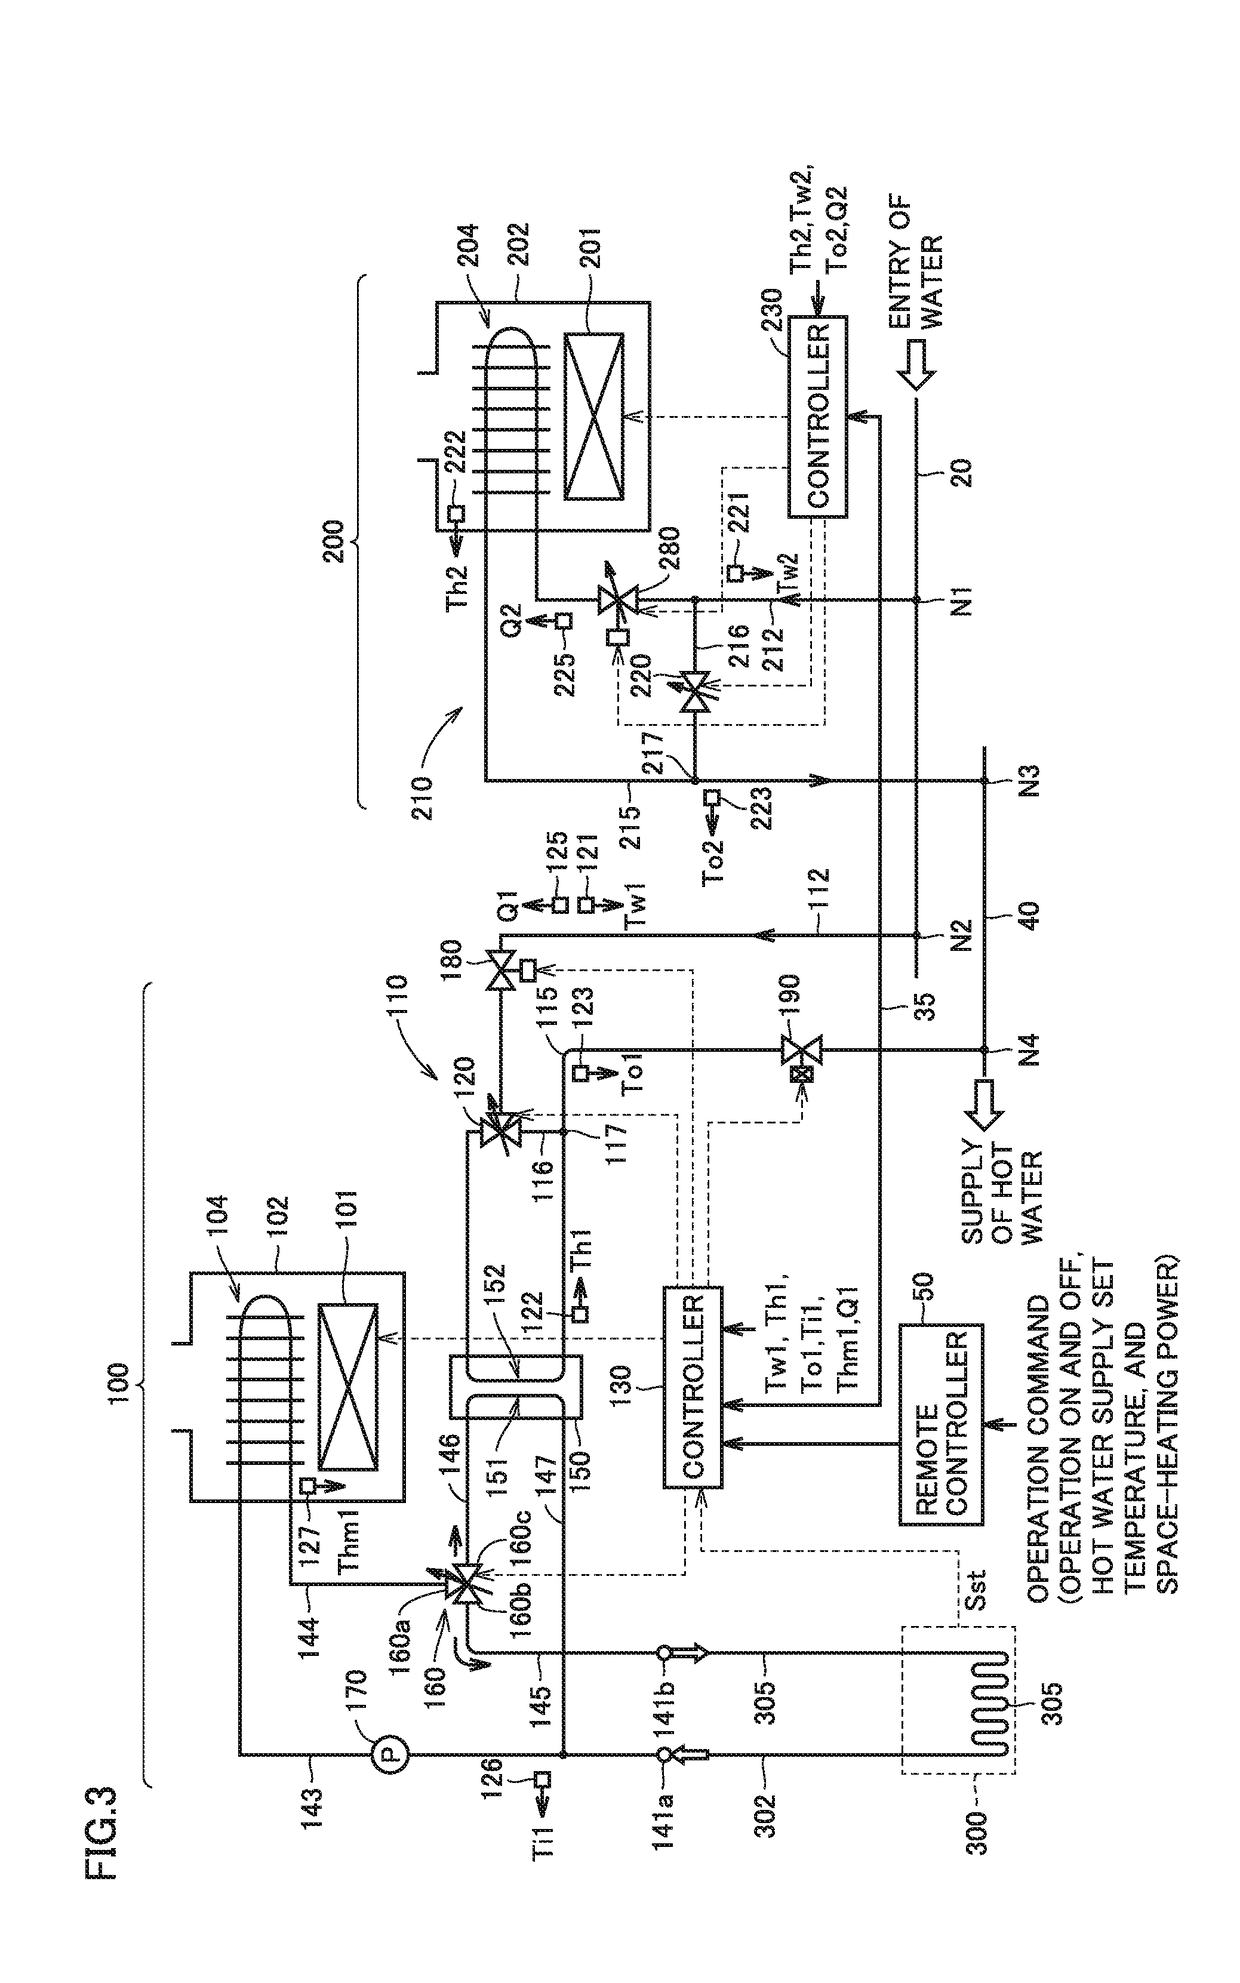 Water heating system including multi-function heat source apparatus